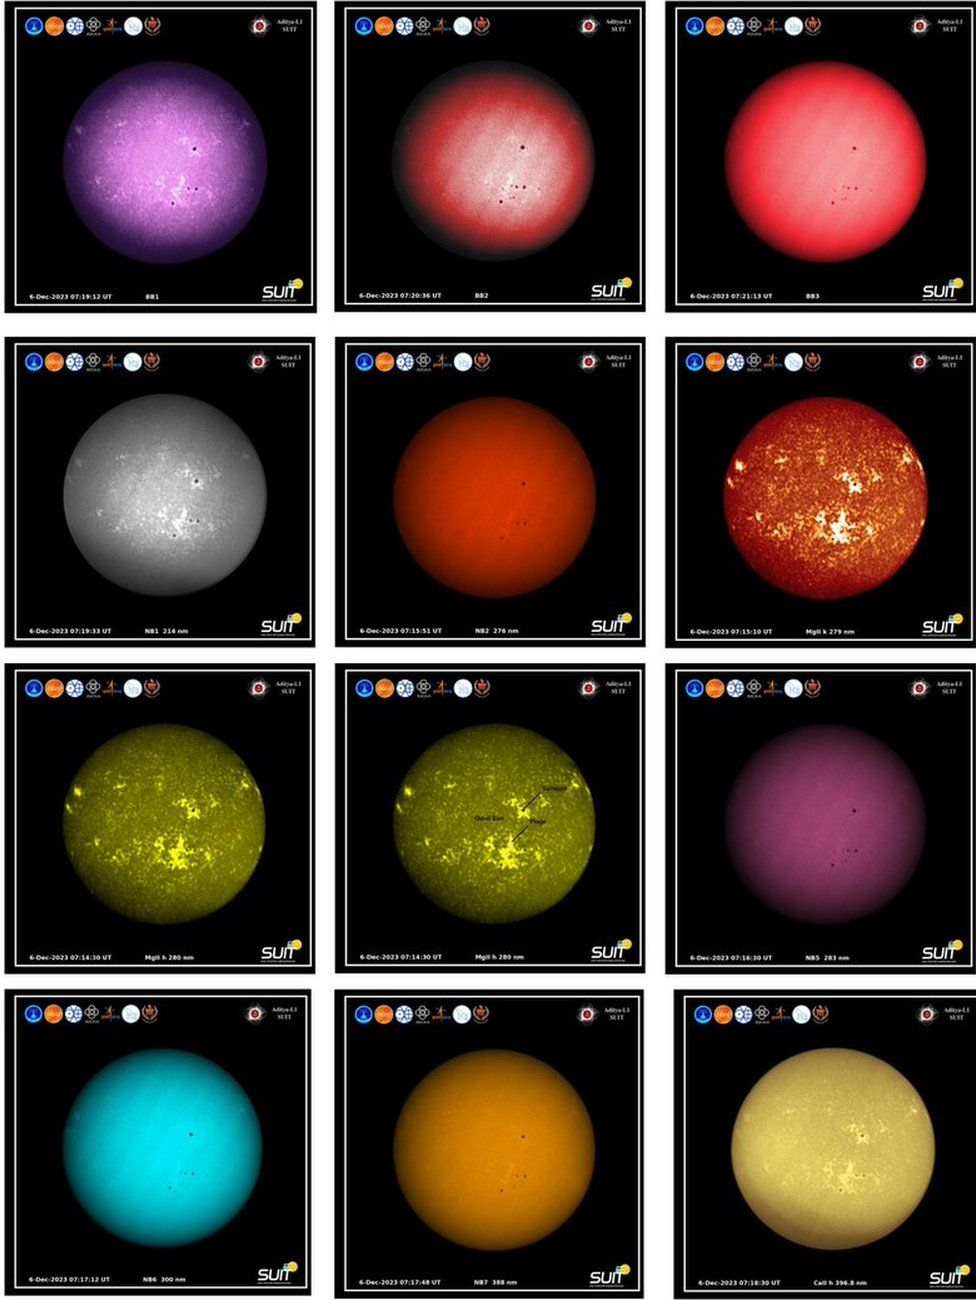 the agency released the first-ever full-disk images of the Sun in wavelengths ranging from 200 to 400 nanometre, saying they provided "insights into the intricate details of the Sun's photosphere and chromosphere".